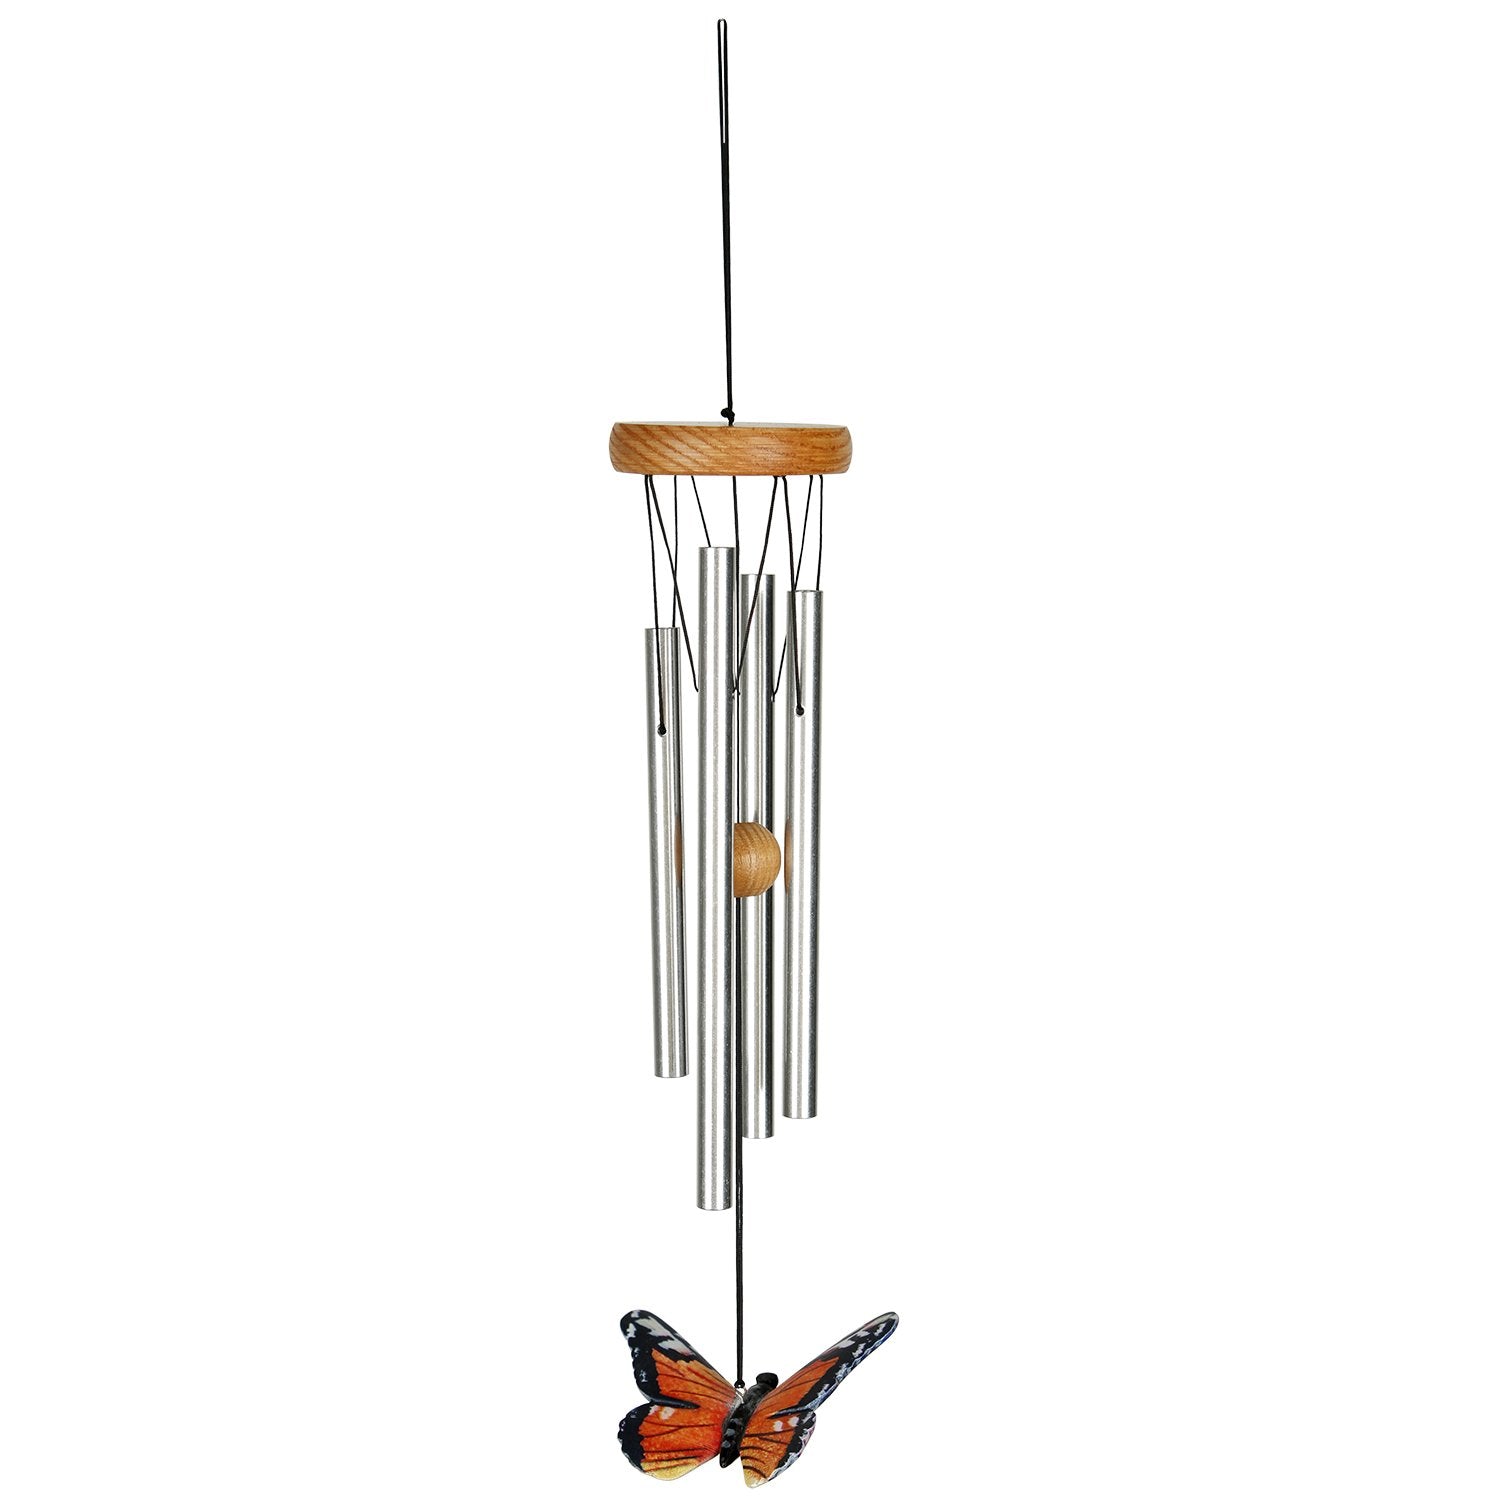 Monarch Butterfly Chime full product image